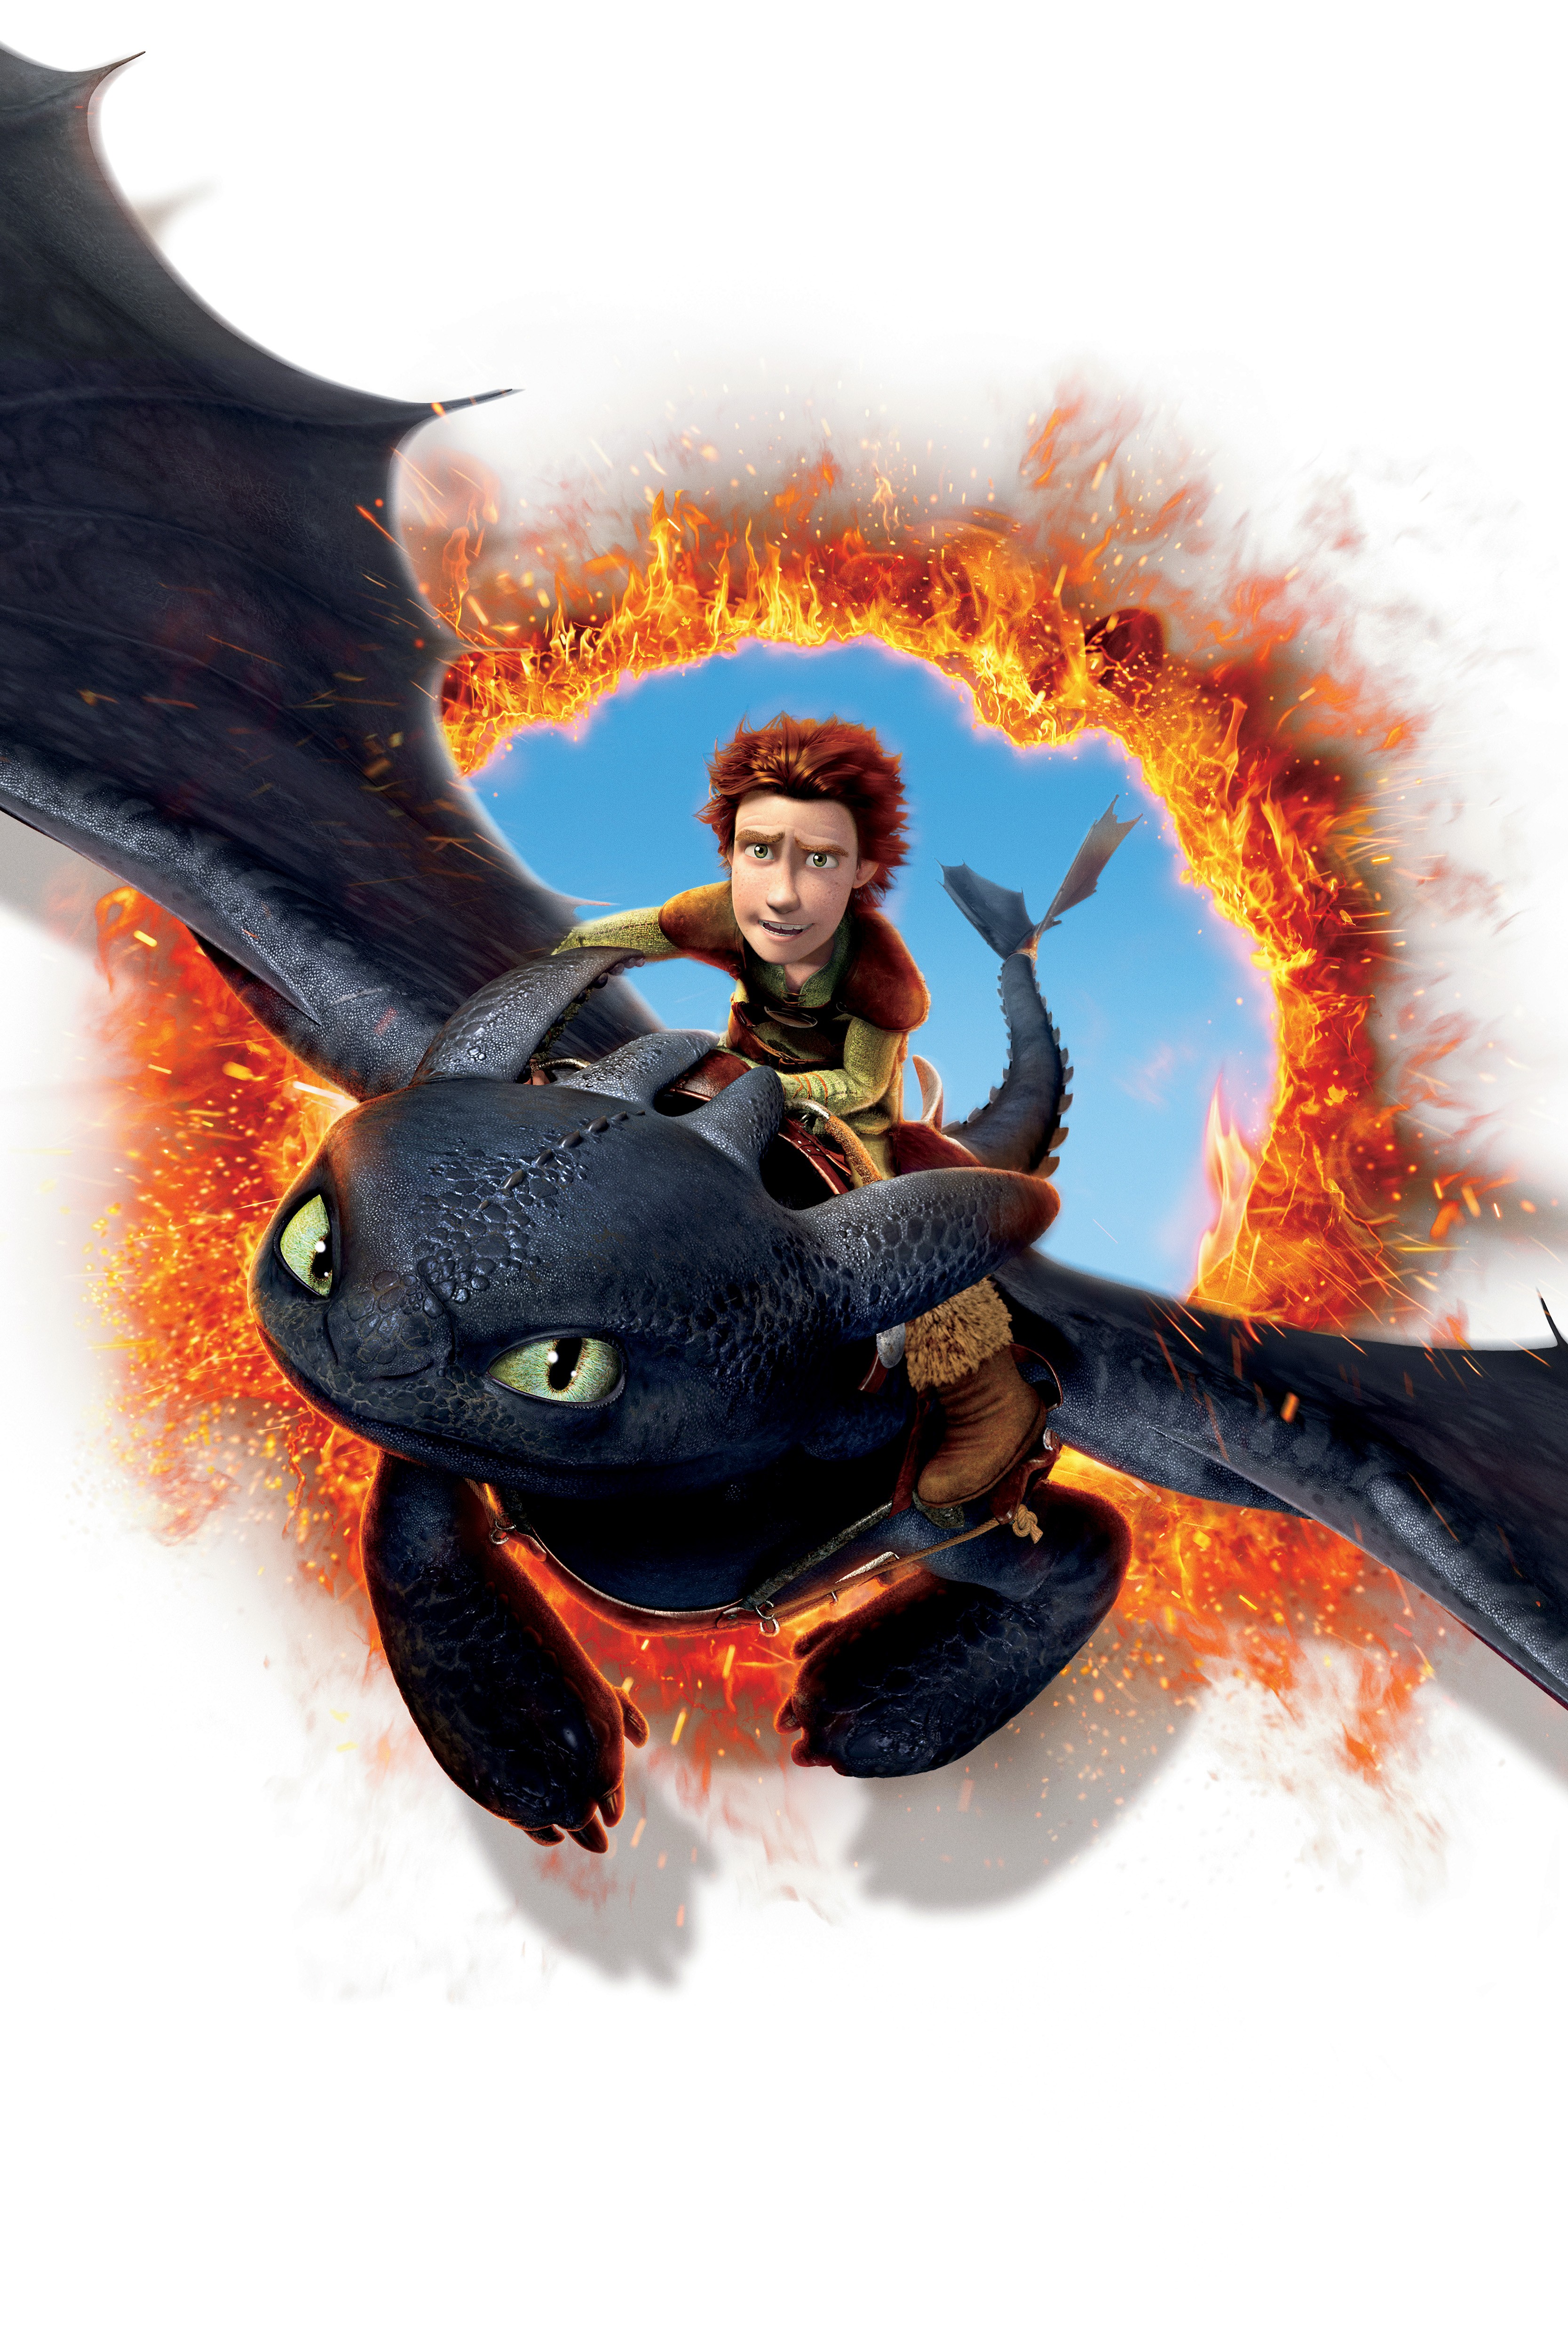 General 3334x5000 dragon movies animated movies How to Train Your Dragon movie characters